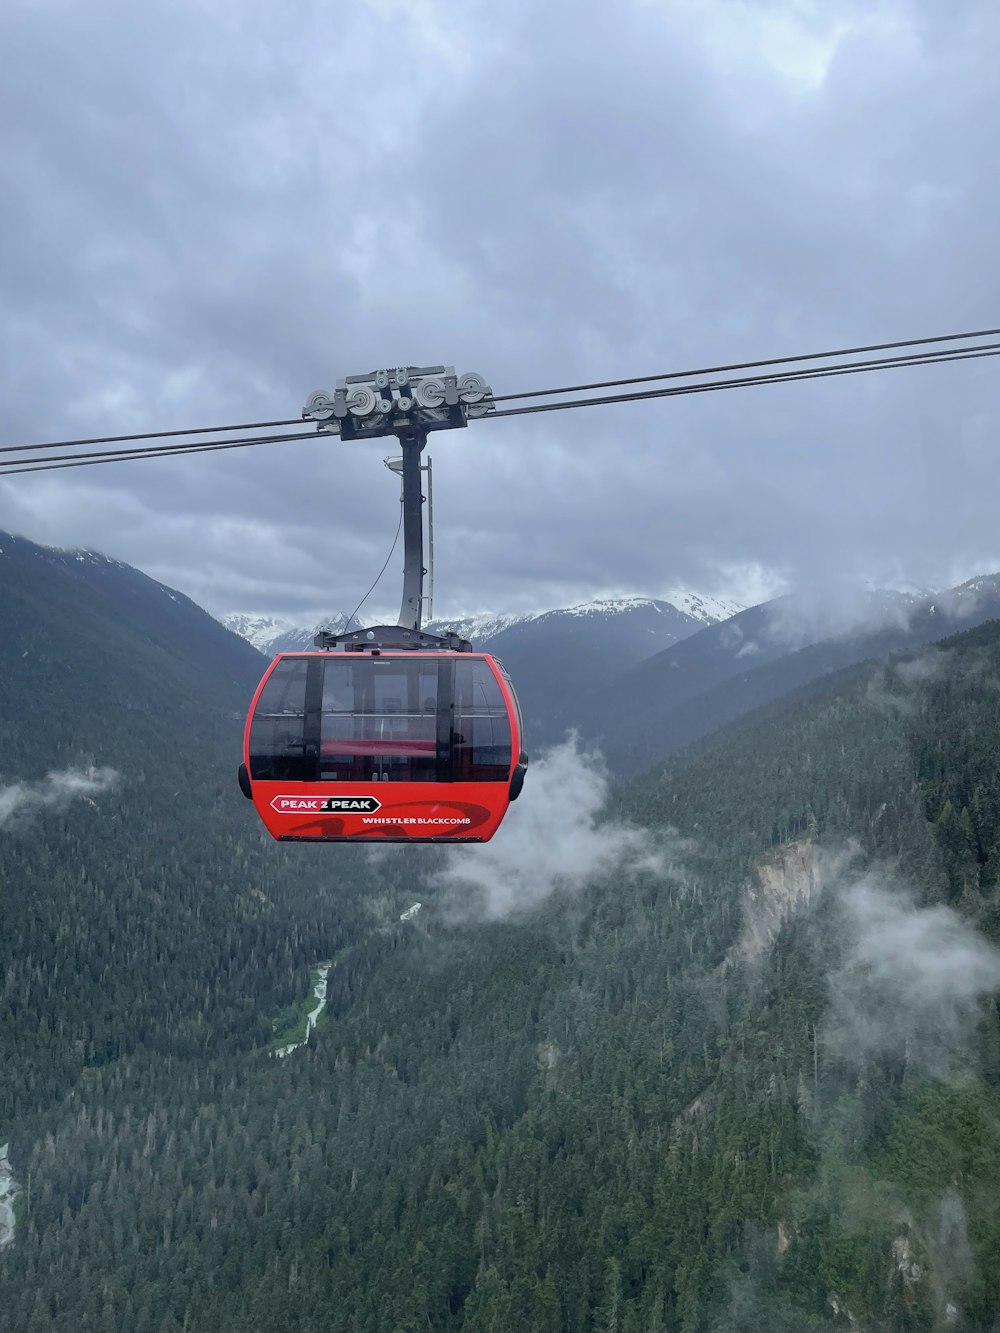 a red cable car in the middle of a mountain